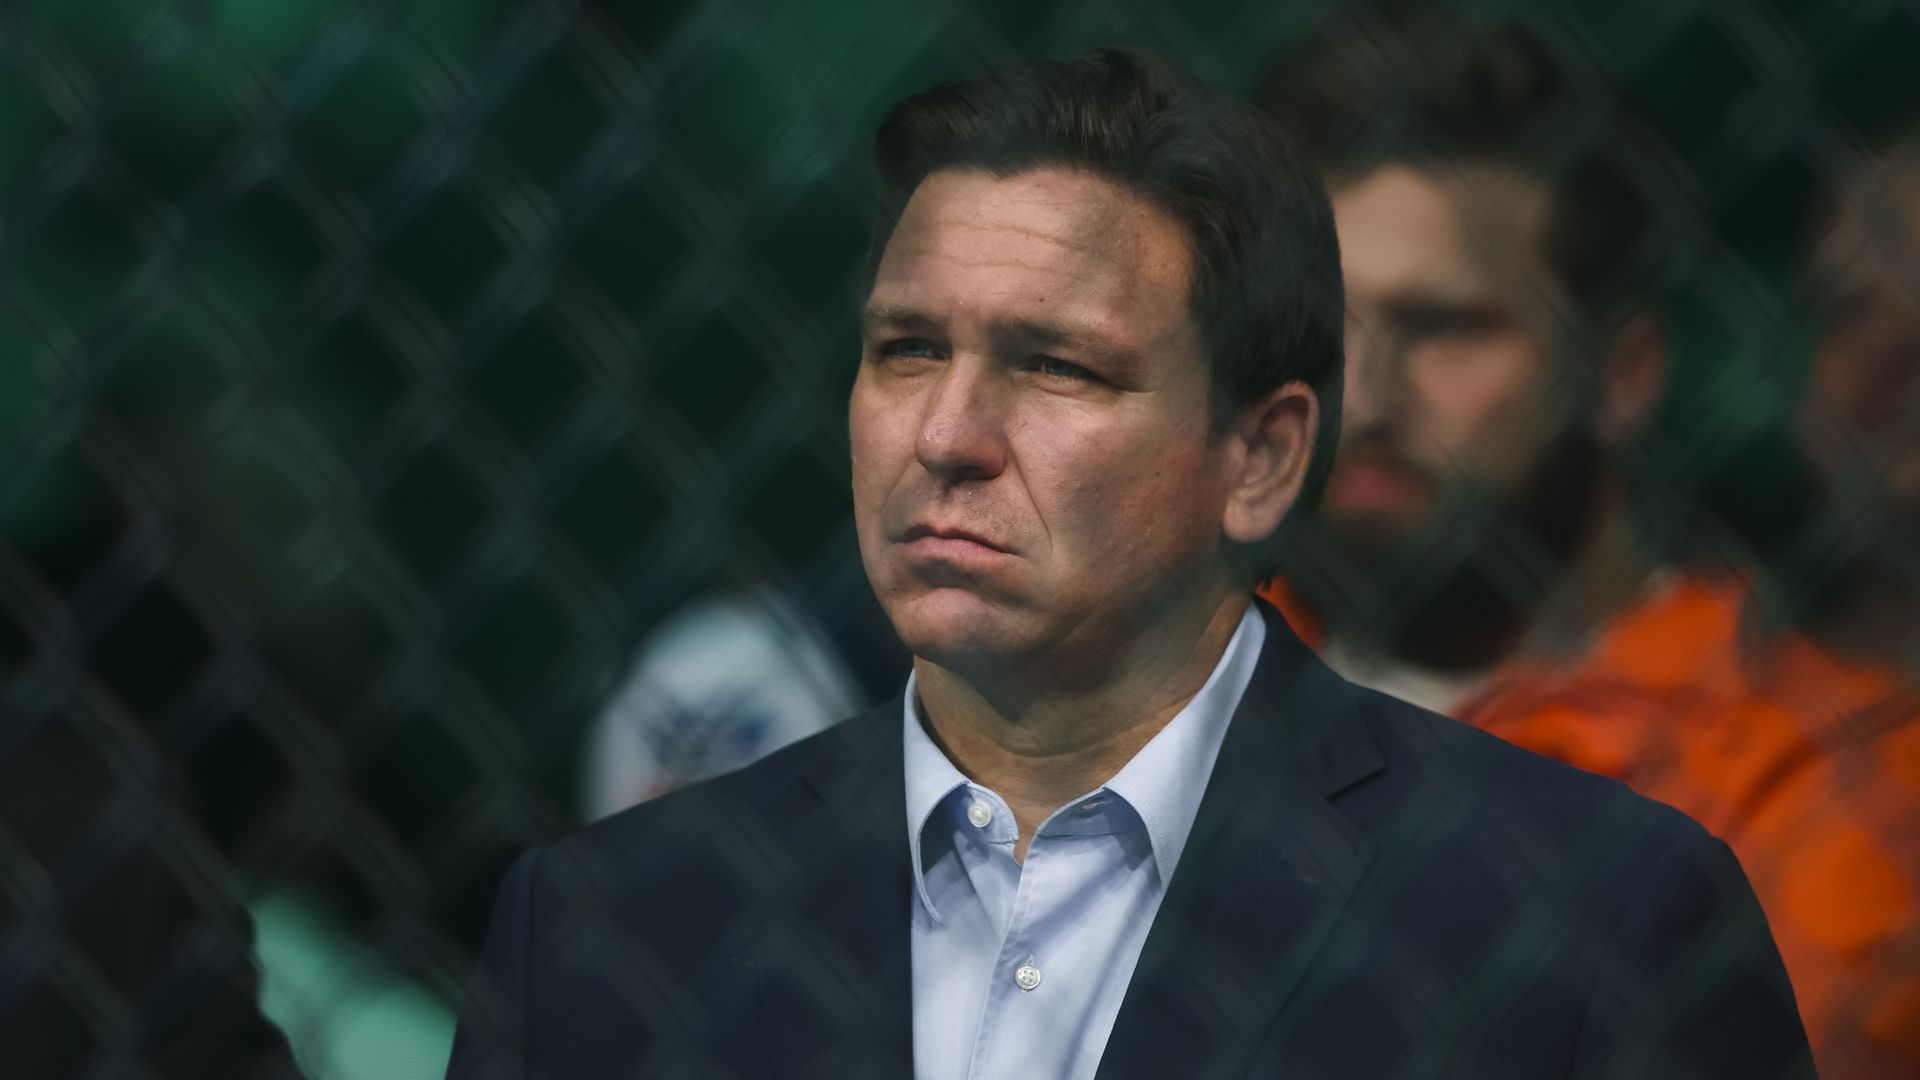 Photo of Ron DeSantis standing behind a fence